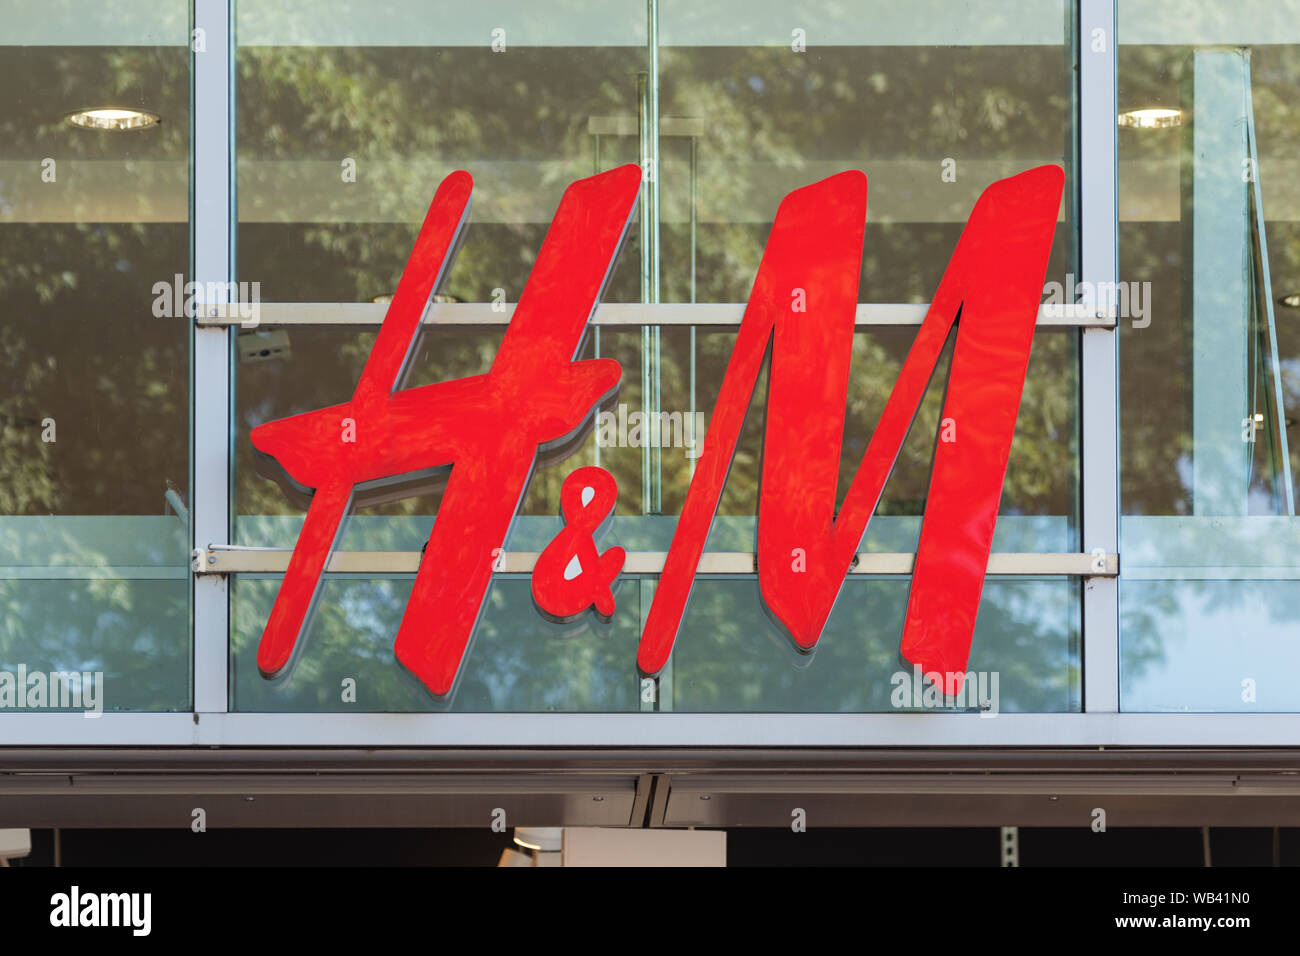 Stade, Germany - August 22, 2019: Signage at storefront identifying a H&M  store Stock Photo - Alamy